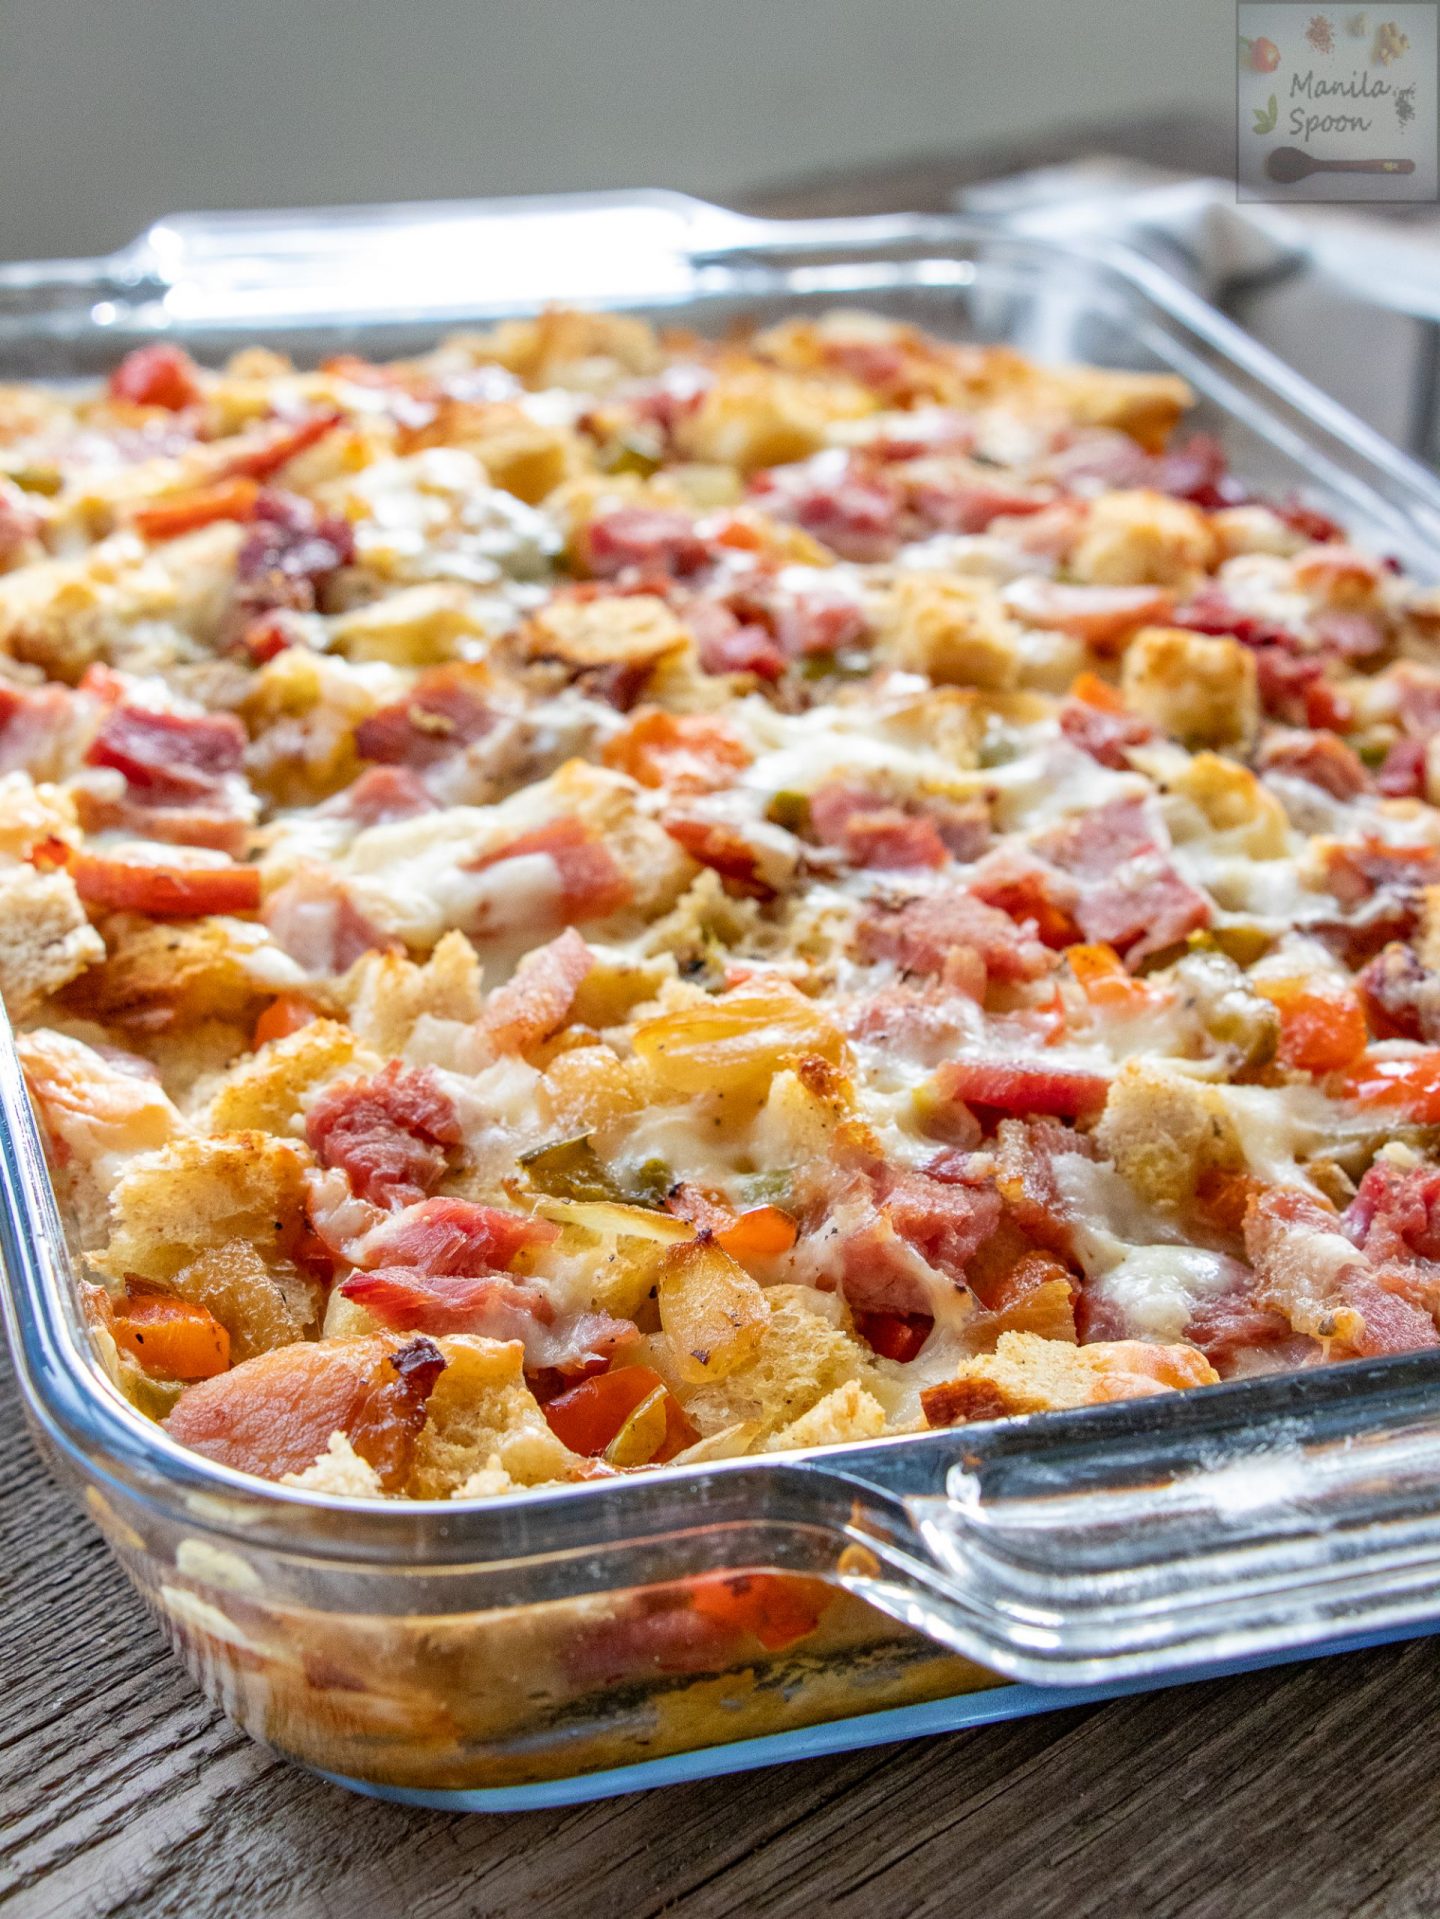 Loaded with ham, red and green peppers, bread, onion, and cheese, this super tasty and colorful ham strata is pleasing both to the eye and palate! It’s make-ahead, too so simply pop it in the oven for a delicious hot breakfast!